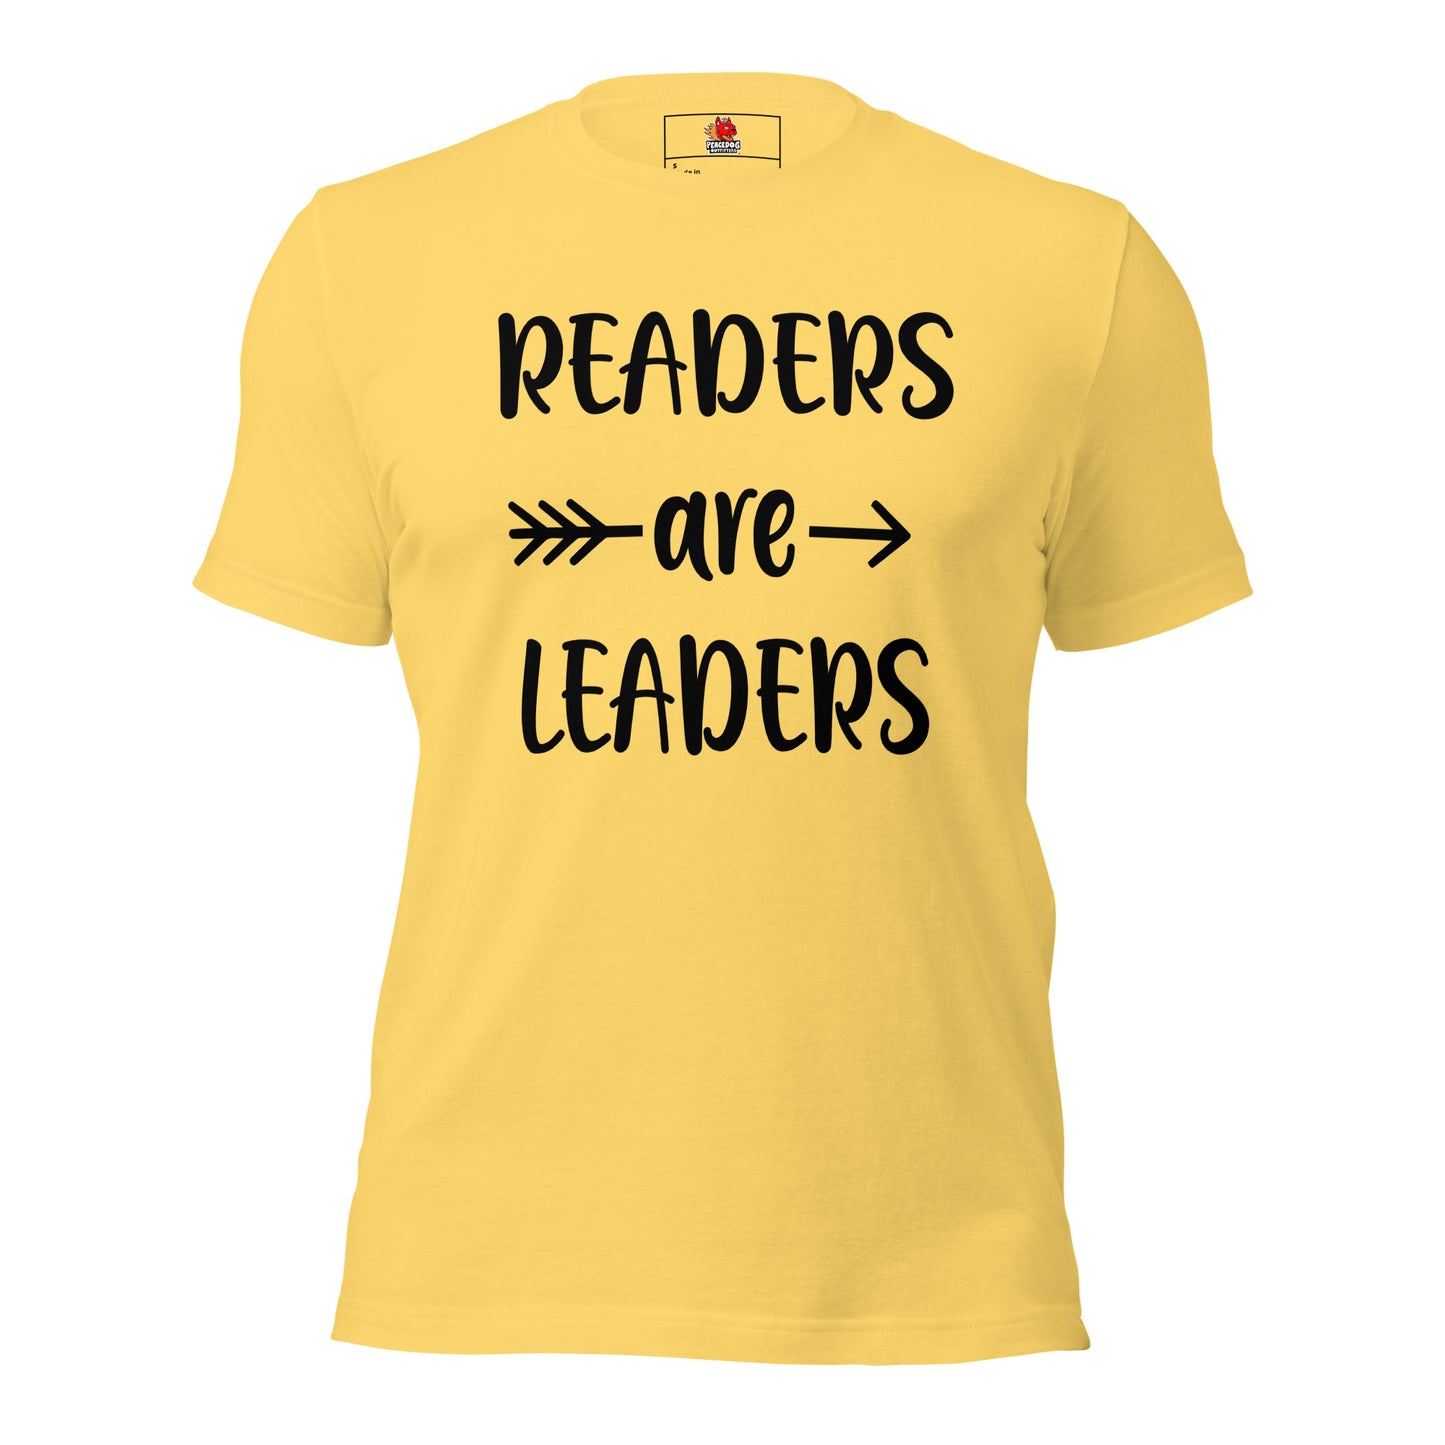 Readers are Leaders T-shirt